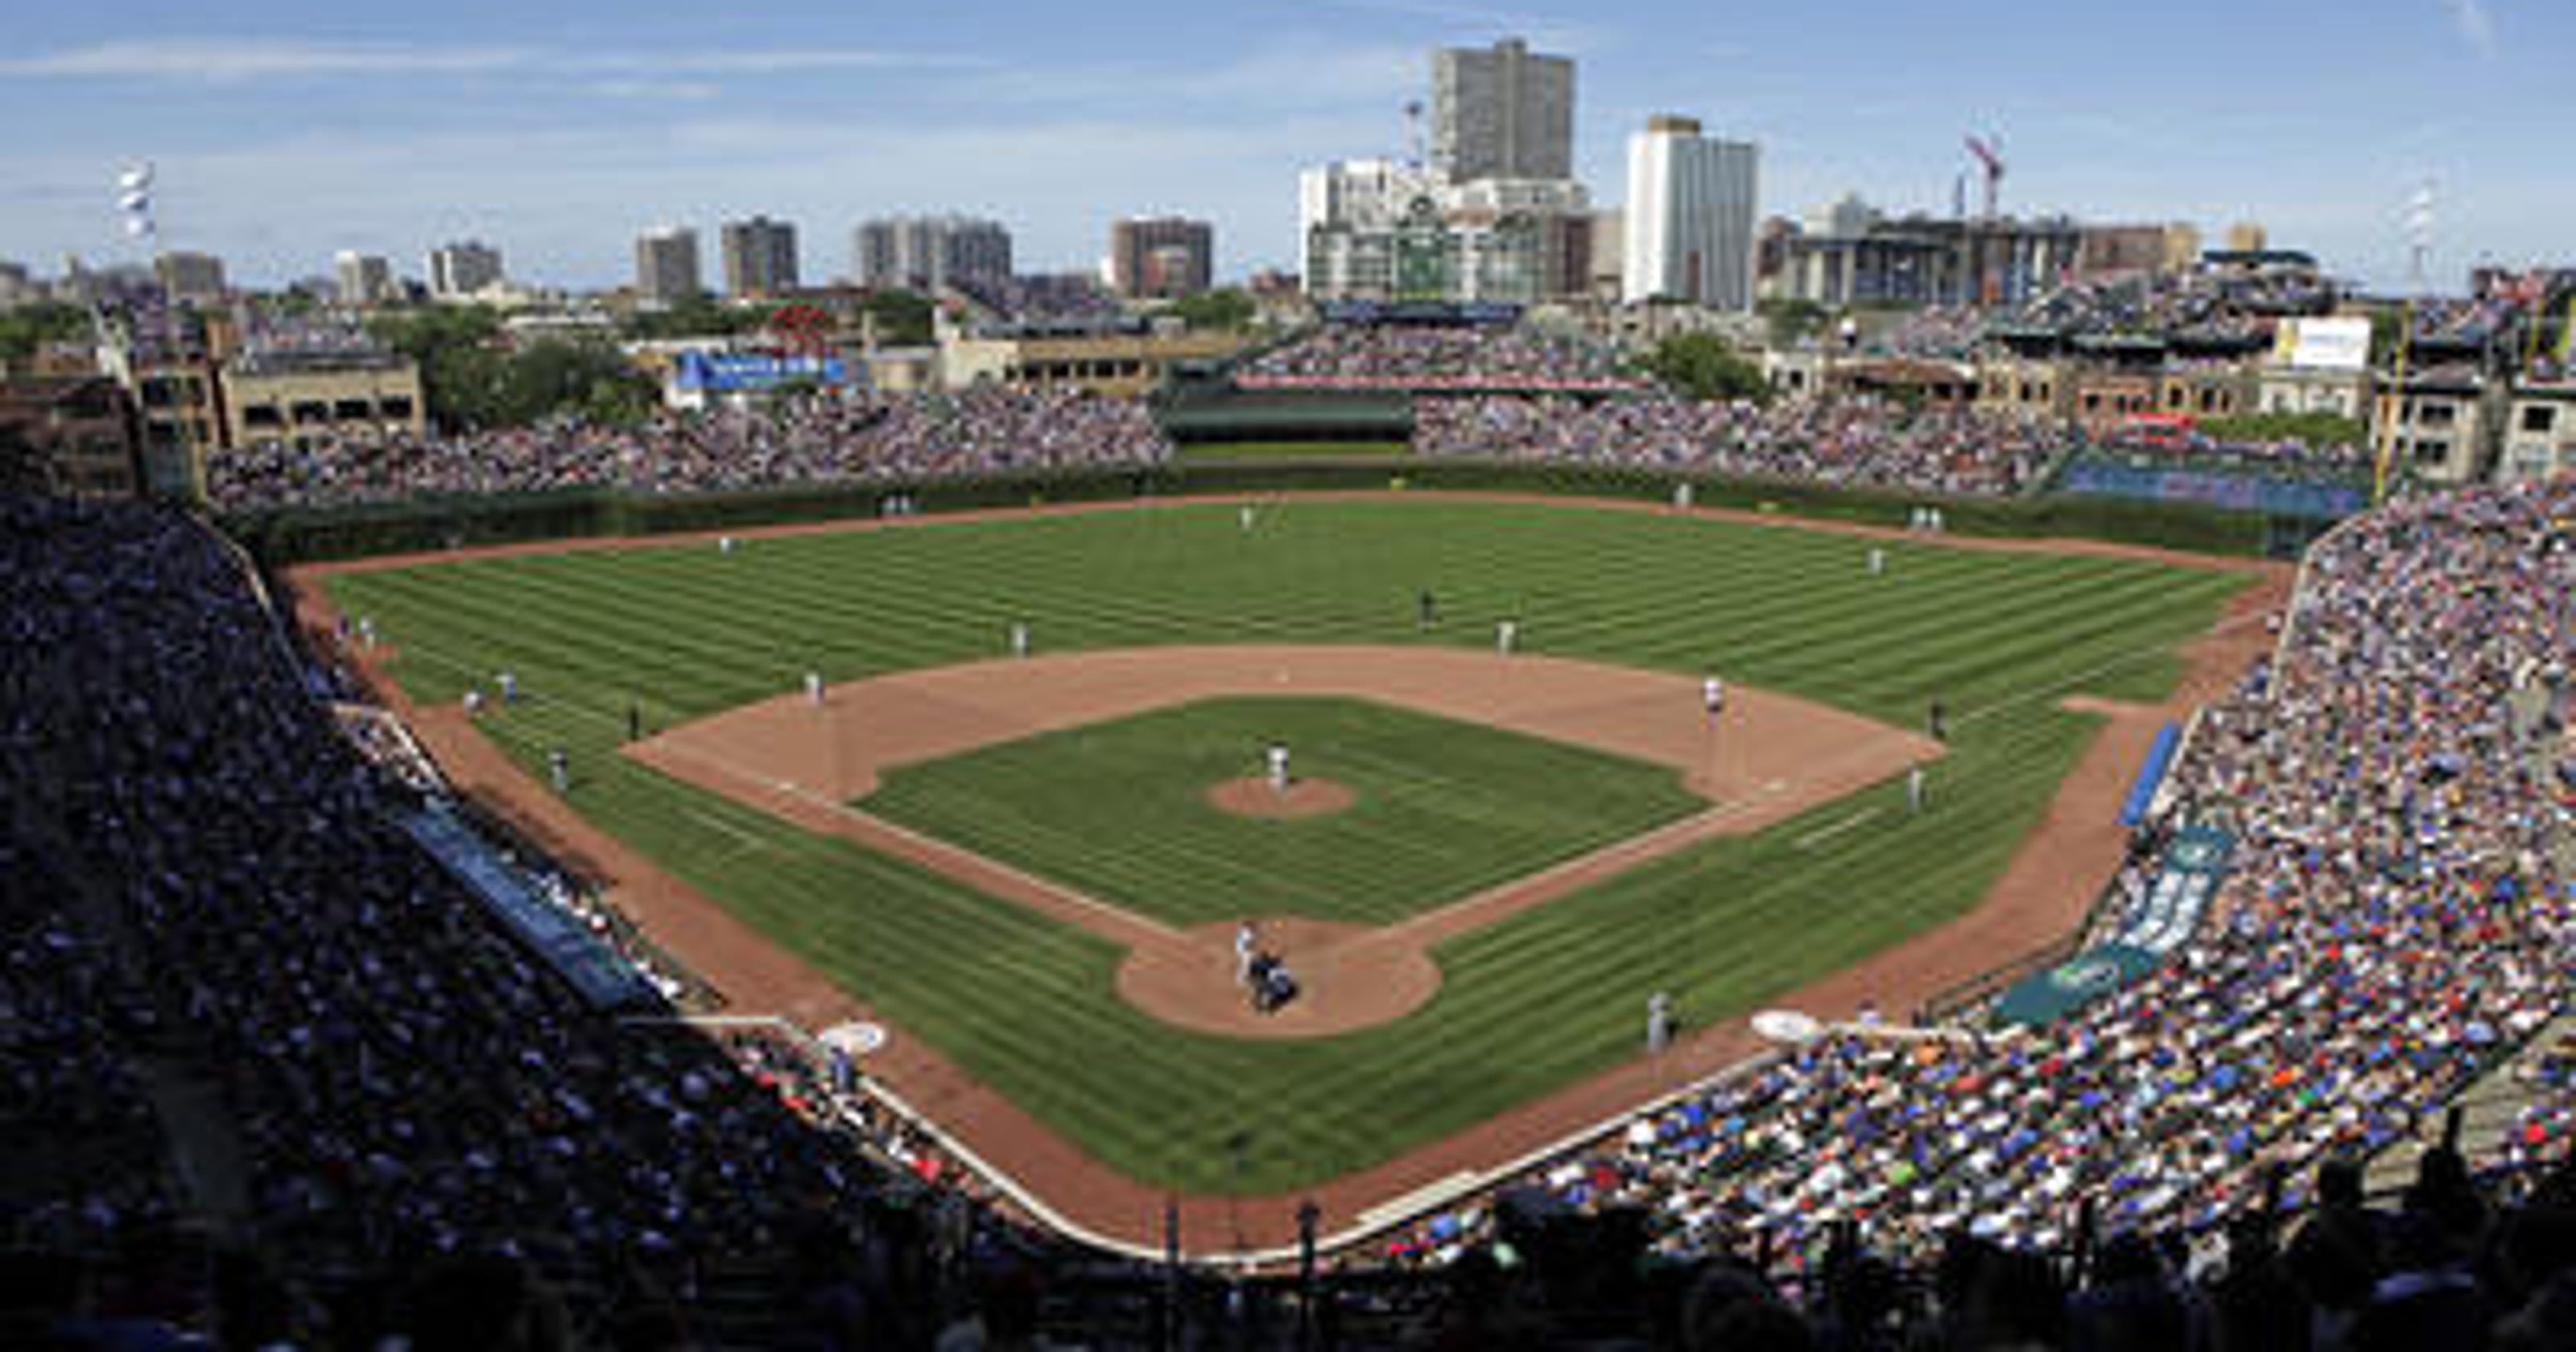 Wrigley Field's 100th anniversary sparks nostalgic stadium thoughts